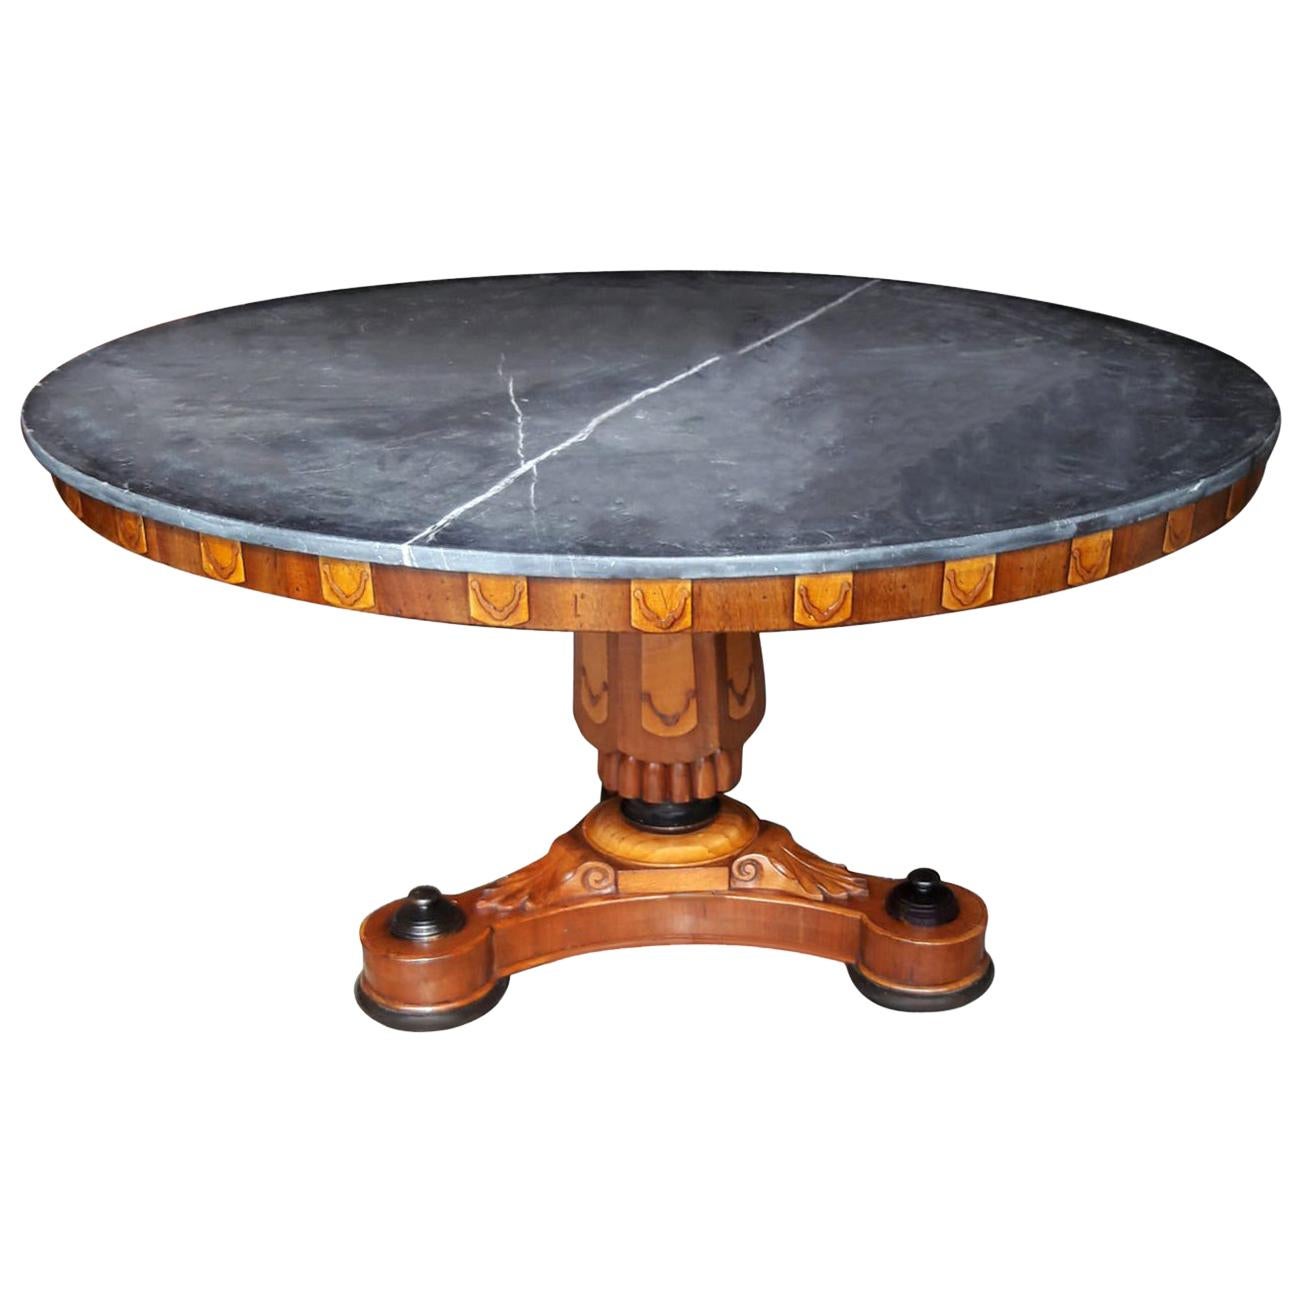 19th Century Engraved Wood Rounded Marquinia Marble Top Table, France Charles X